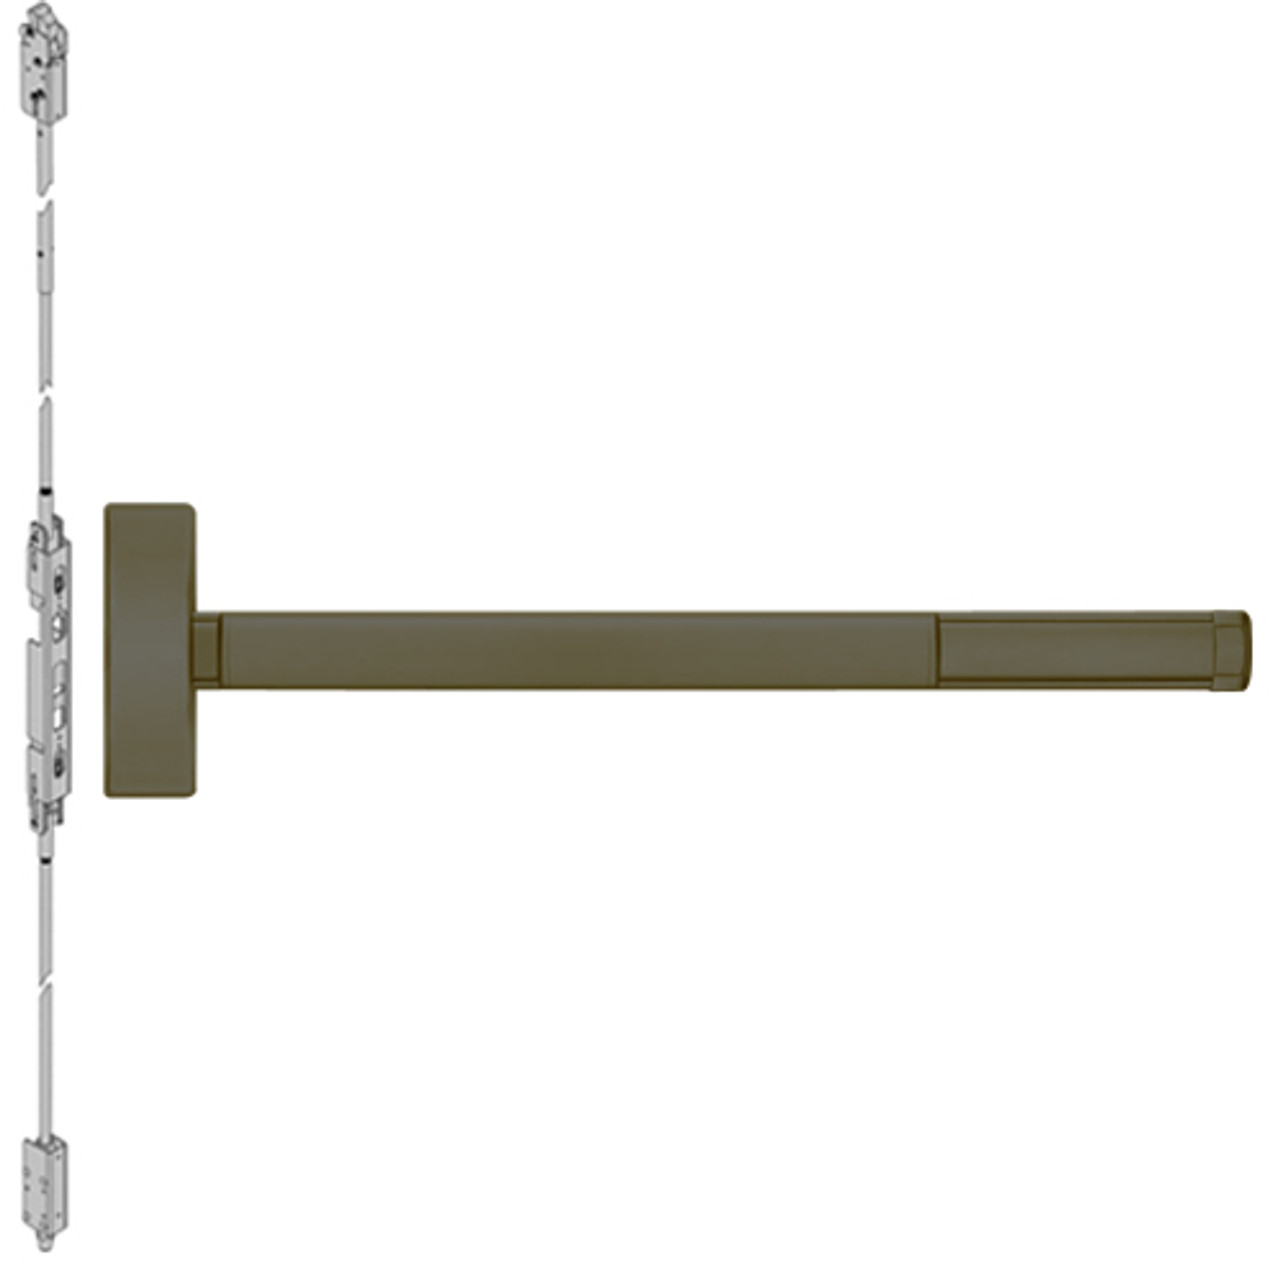 DEFL2805-613-36 PHI 2800 Series Fire Rated Concealed Vertical Rod Exit Device with Delayed Egress Prepped for Key Controls Thumb Piece in Oil Rubbed Bronze Finish